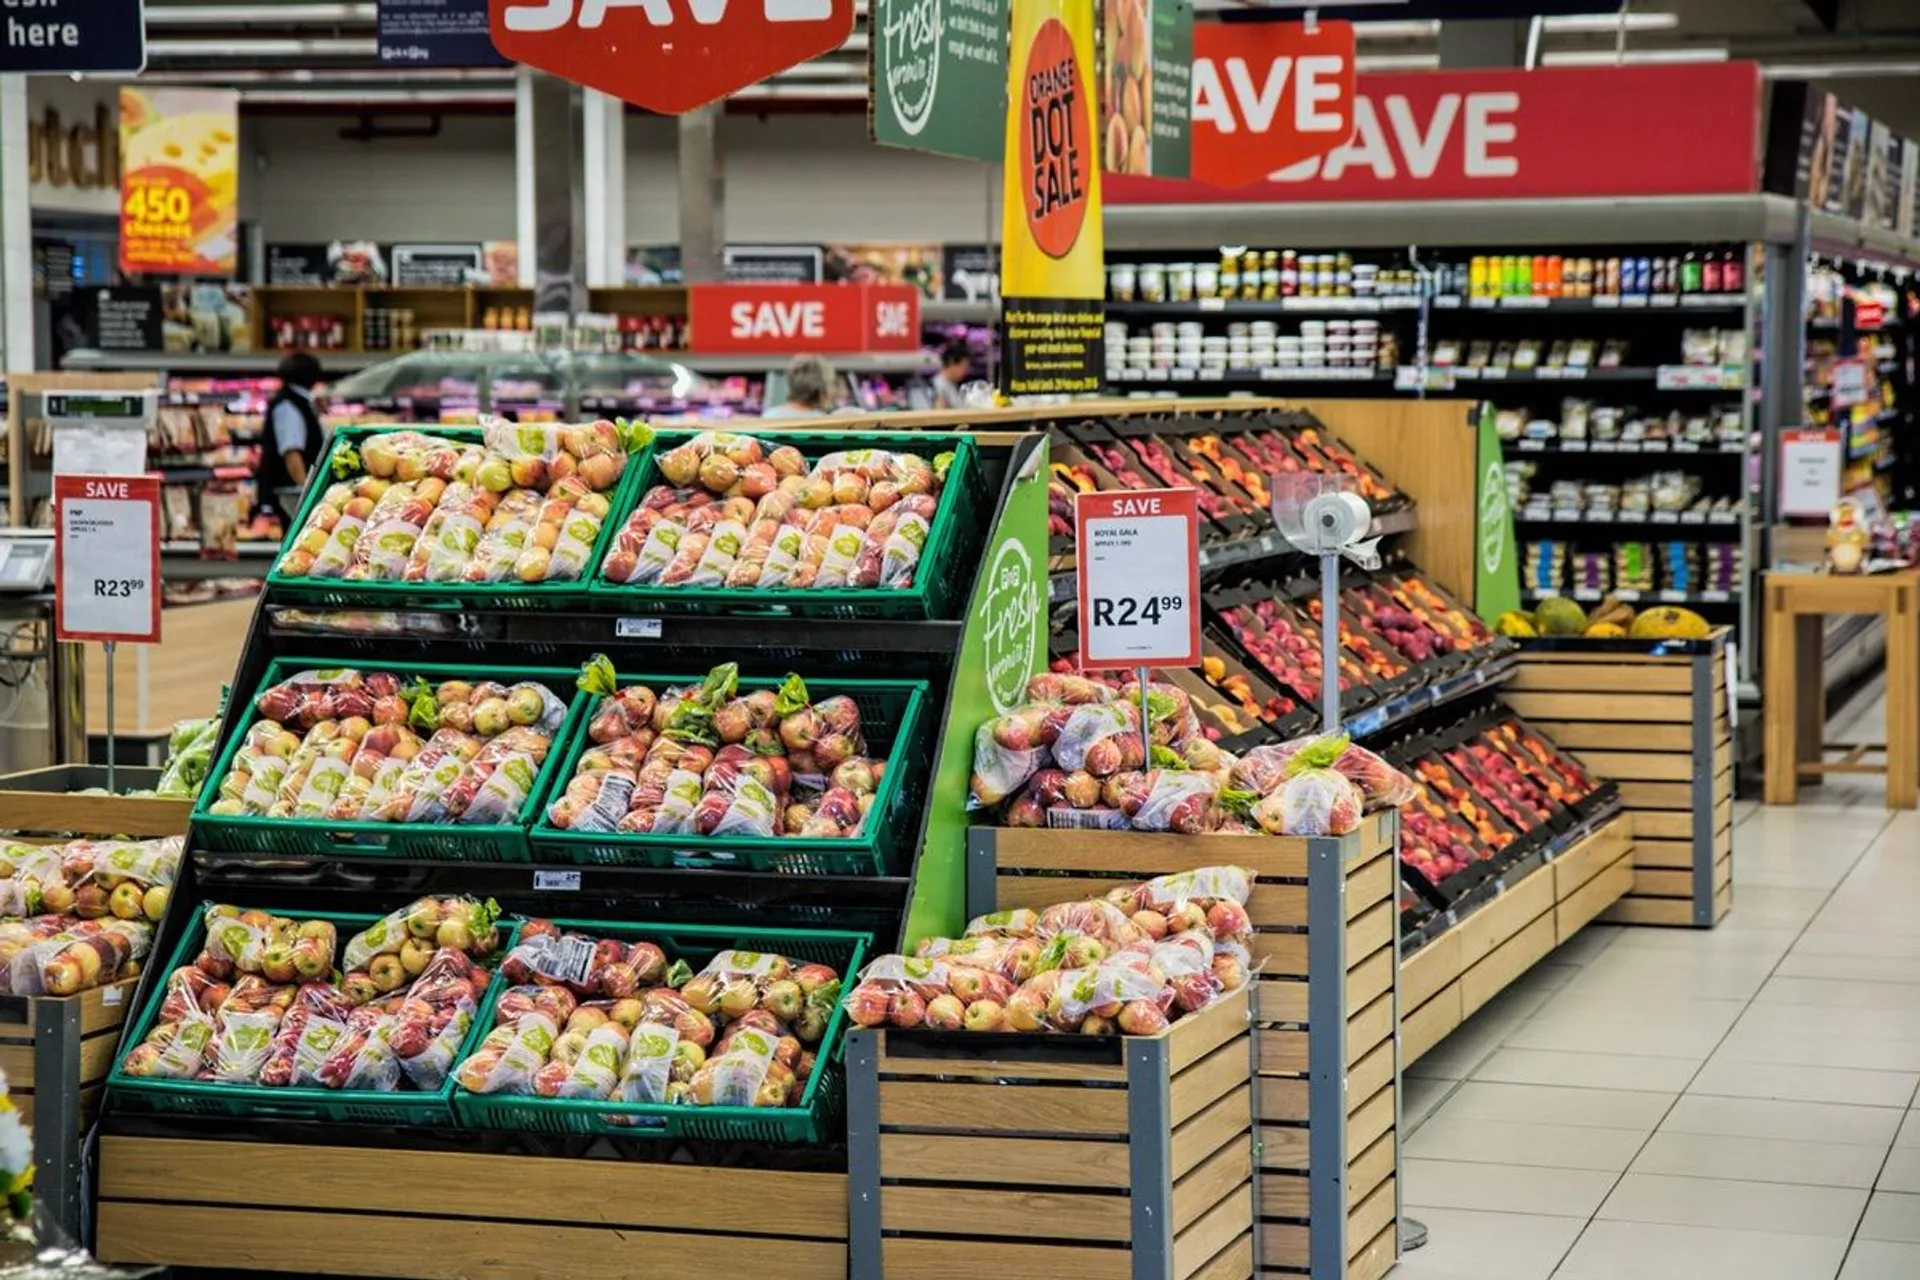 Supermarket hacks: How to find hidden bargains and quality products